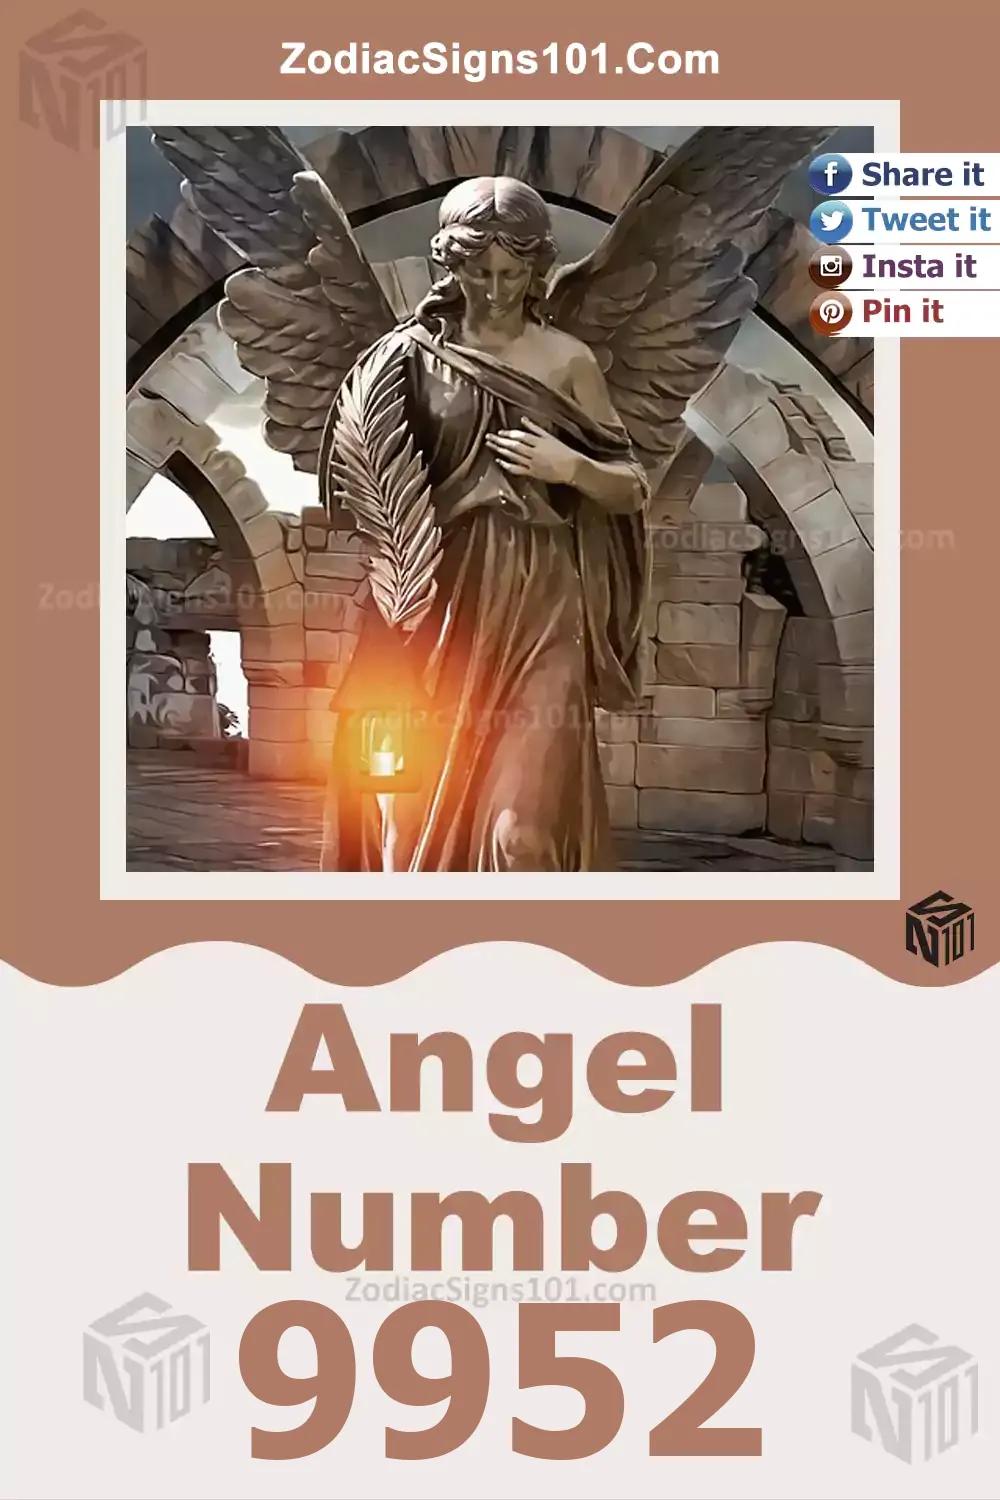 9952 Angel Number Meaning